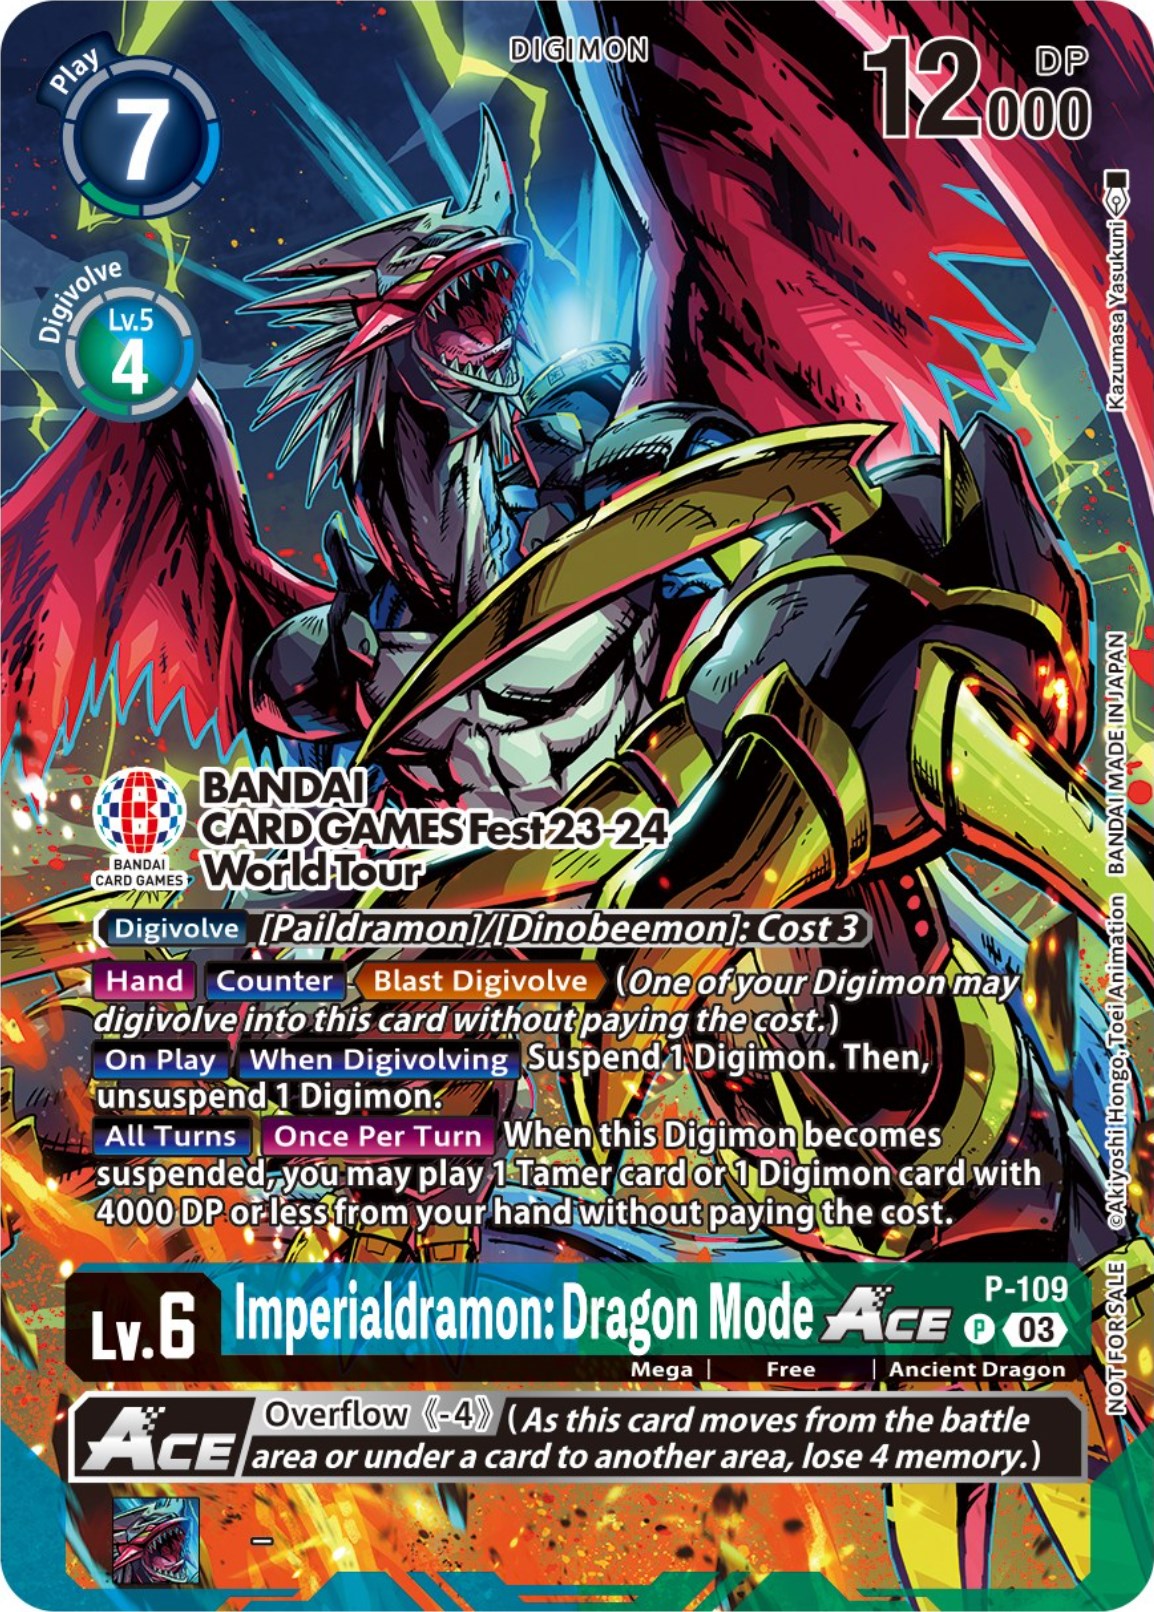 Imperialdramon: Dragon Mode Ace [P-109] (BANDAI Card Games Fest 23-24 World Tour) [Promotional Cards] | Play N Trade Winnipeg